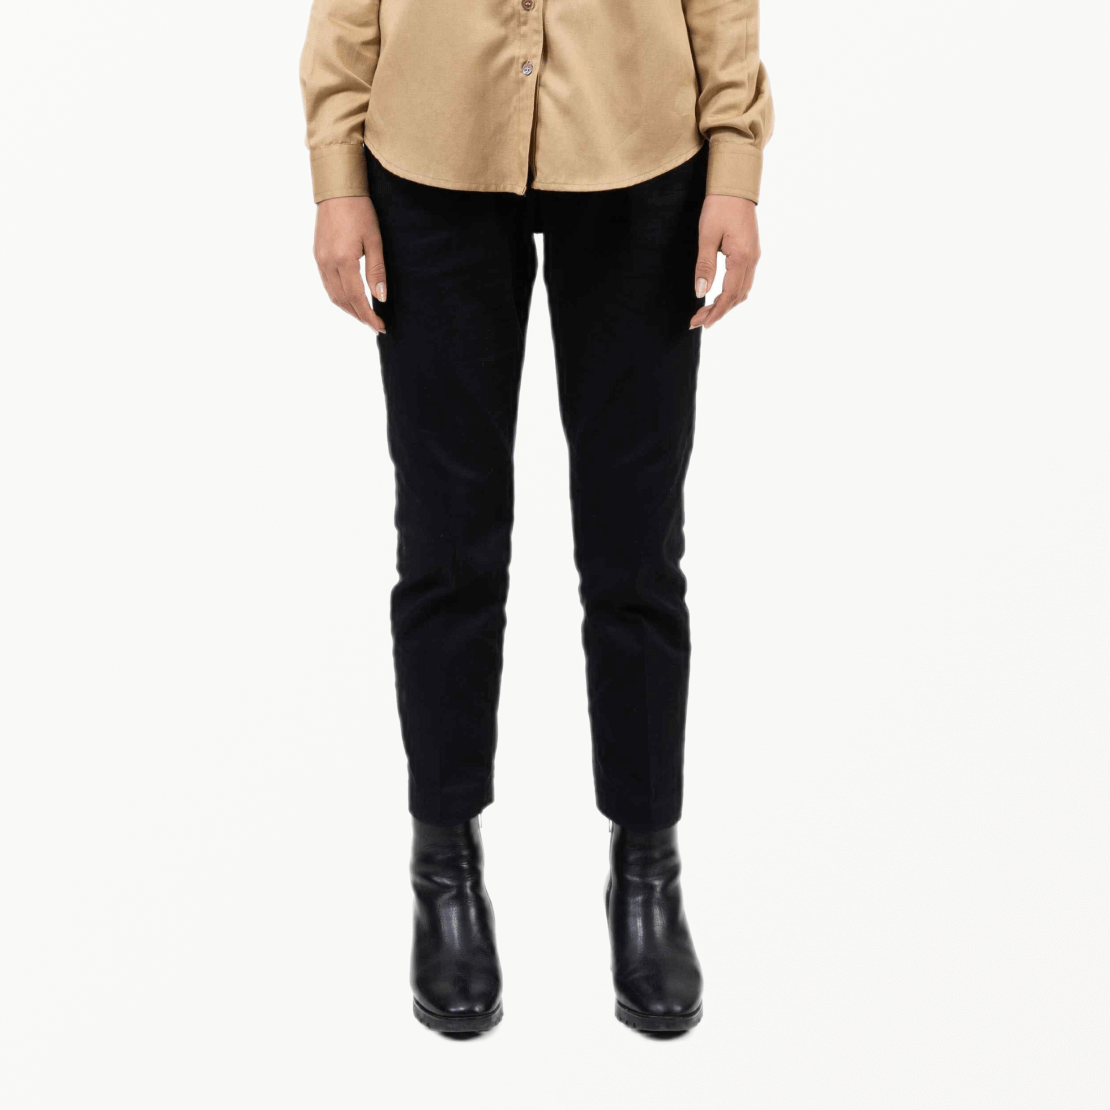 Black Classic Slim Fit Sustainable Power Trouser